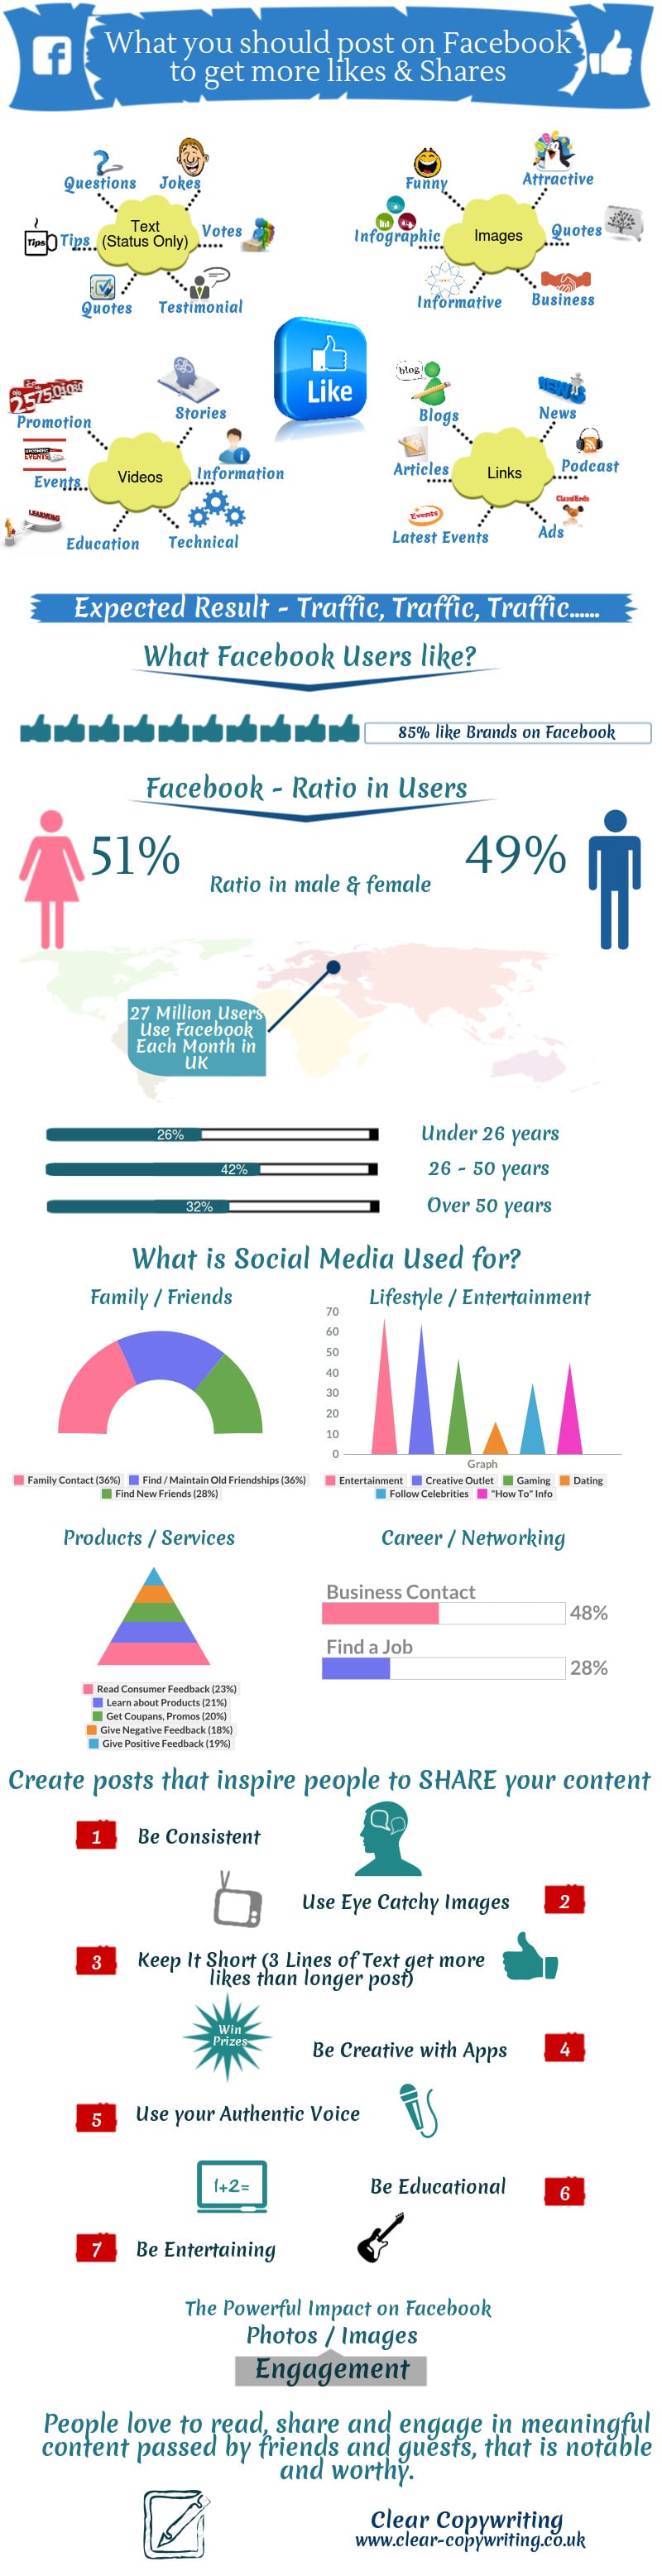 More Likes On Facebook Infographic